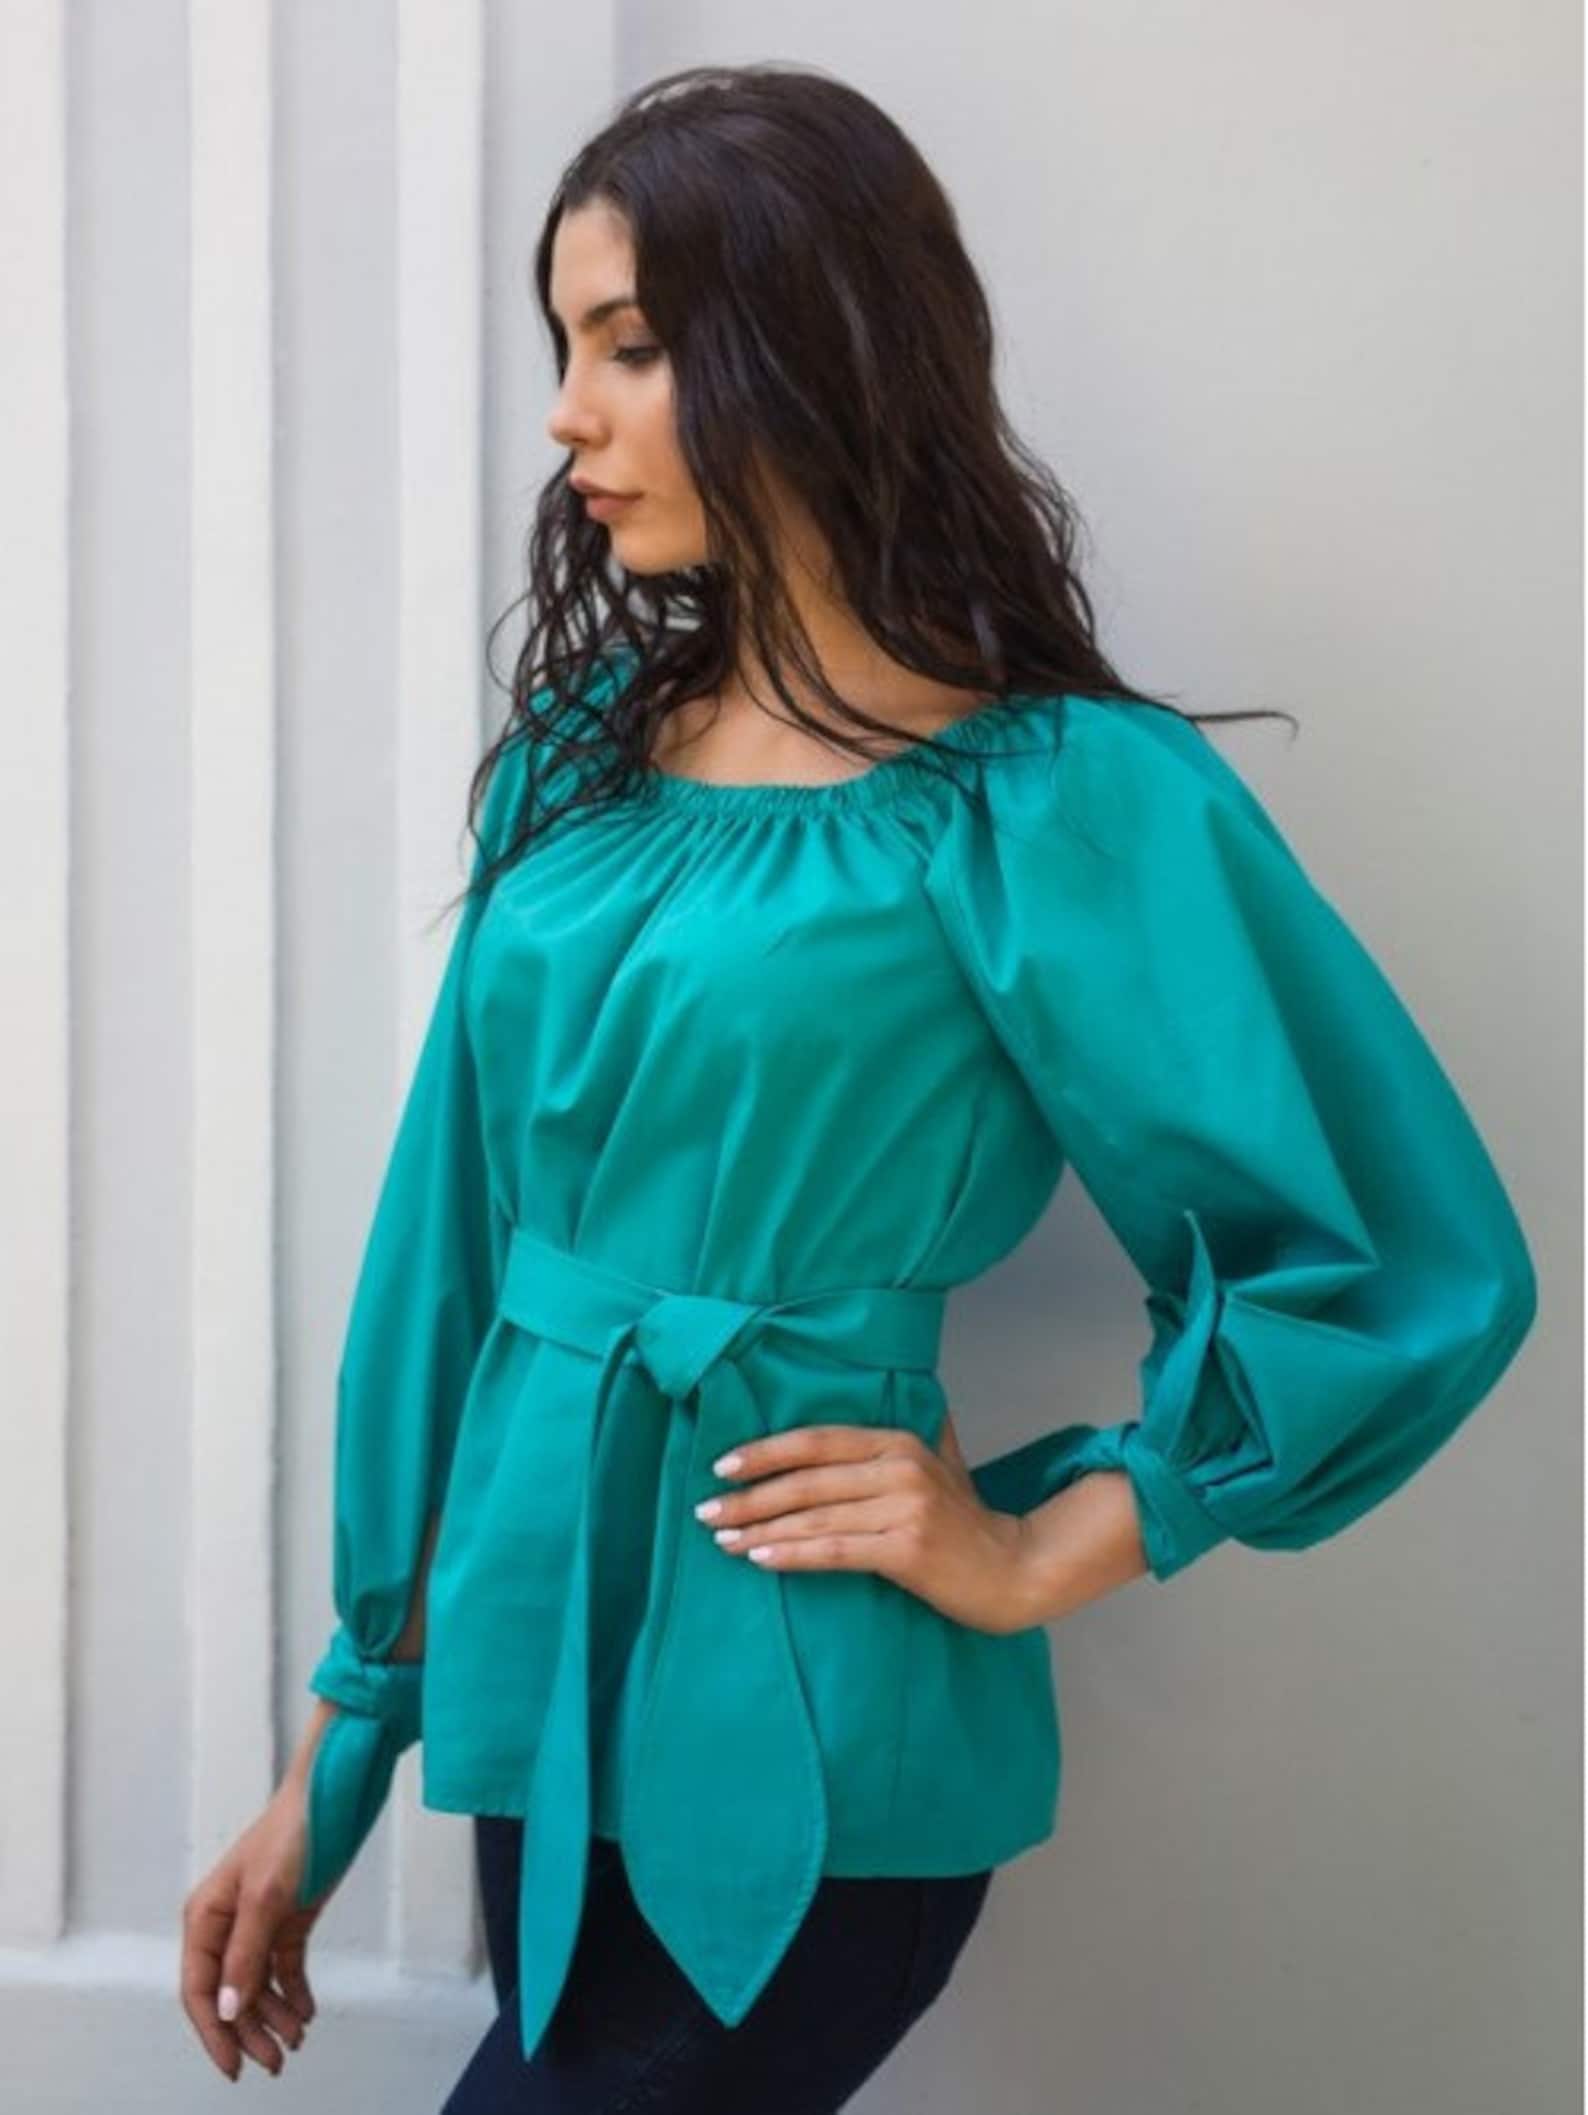 Turquoise cotton blouse Shirt long sleeves Autumn Blouse with | Etsy